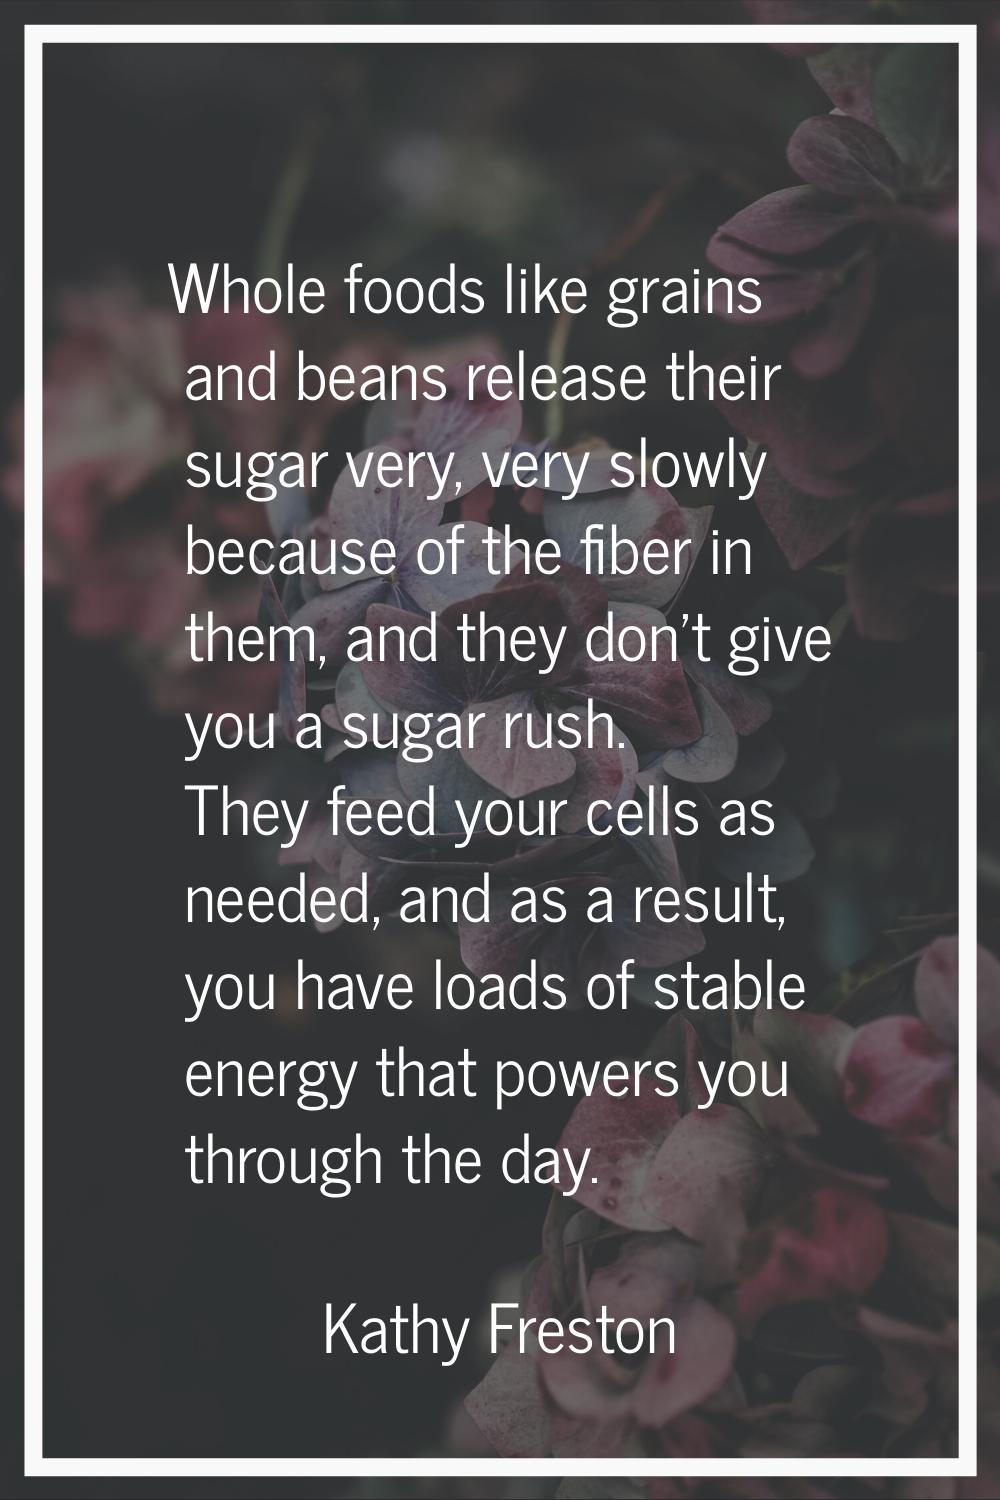 Whole foods like grains and beans release their sugar very, very slowly because of the fiber in the